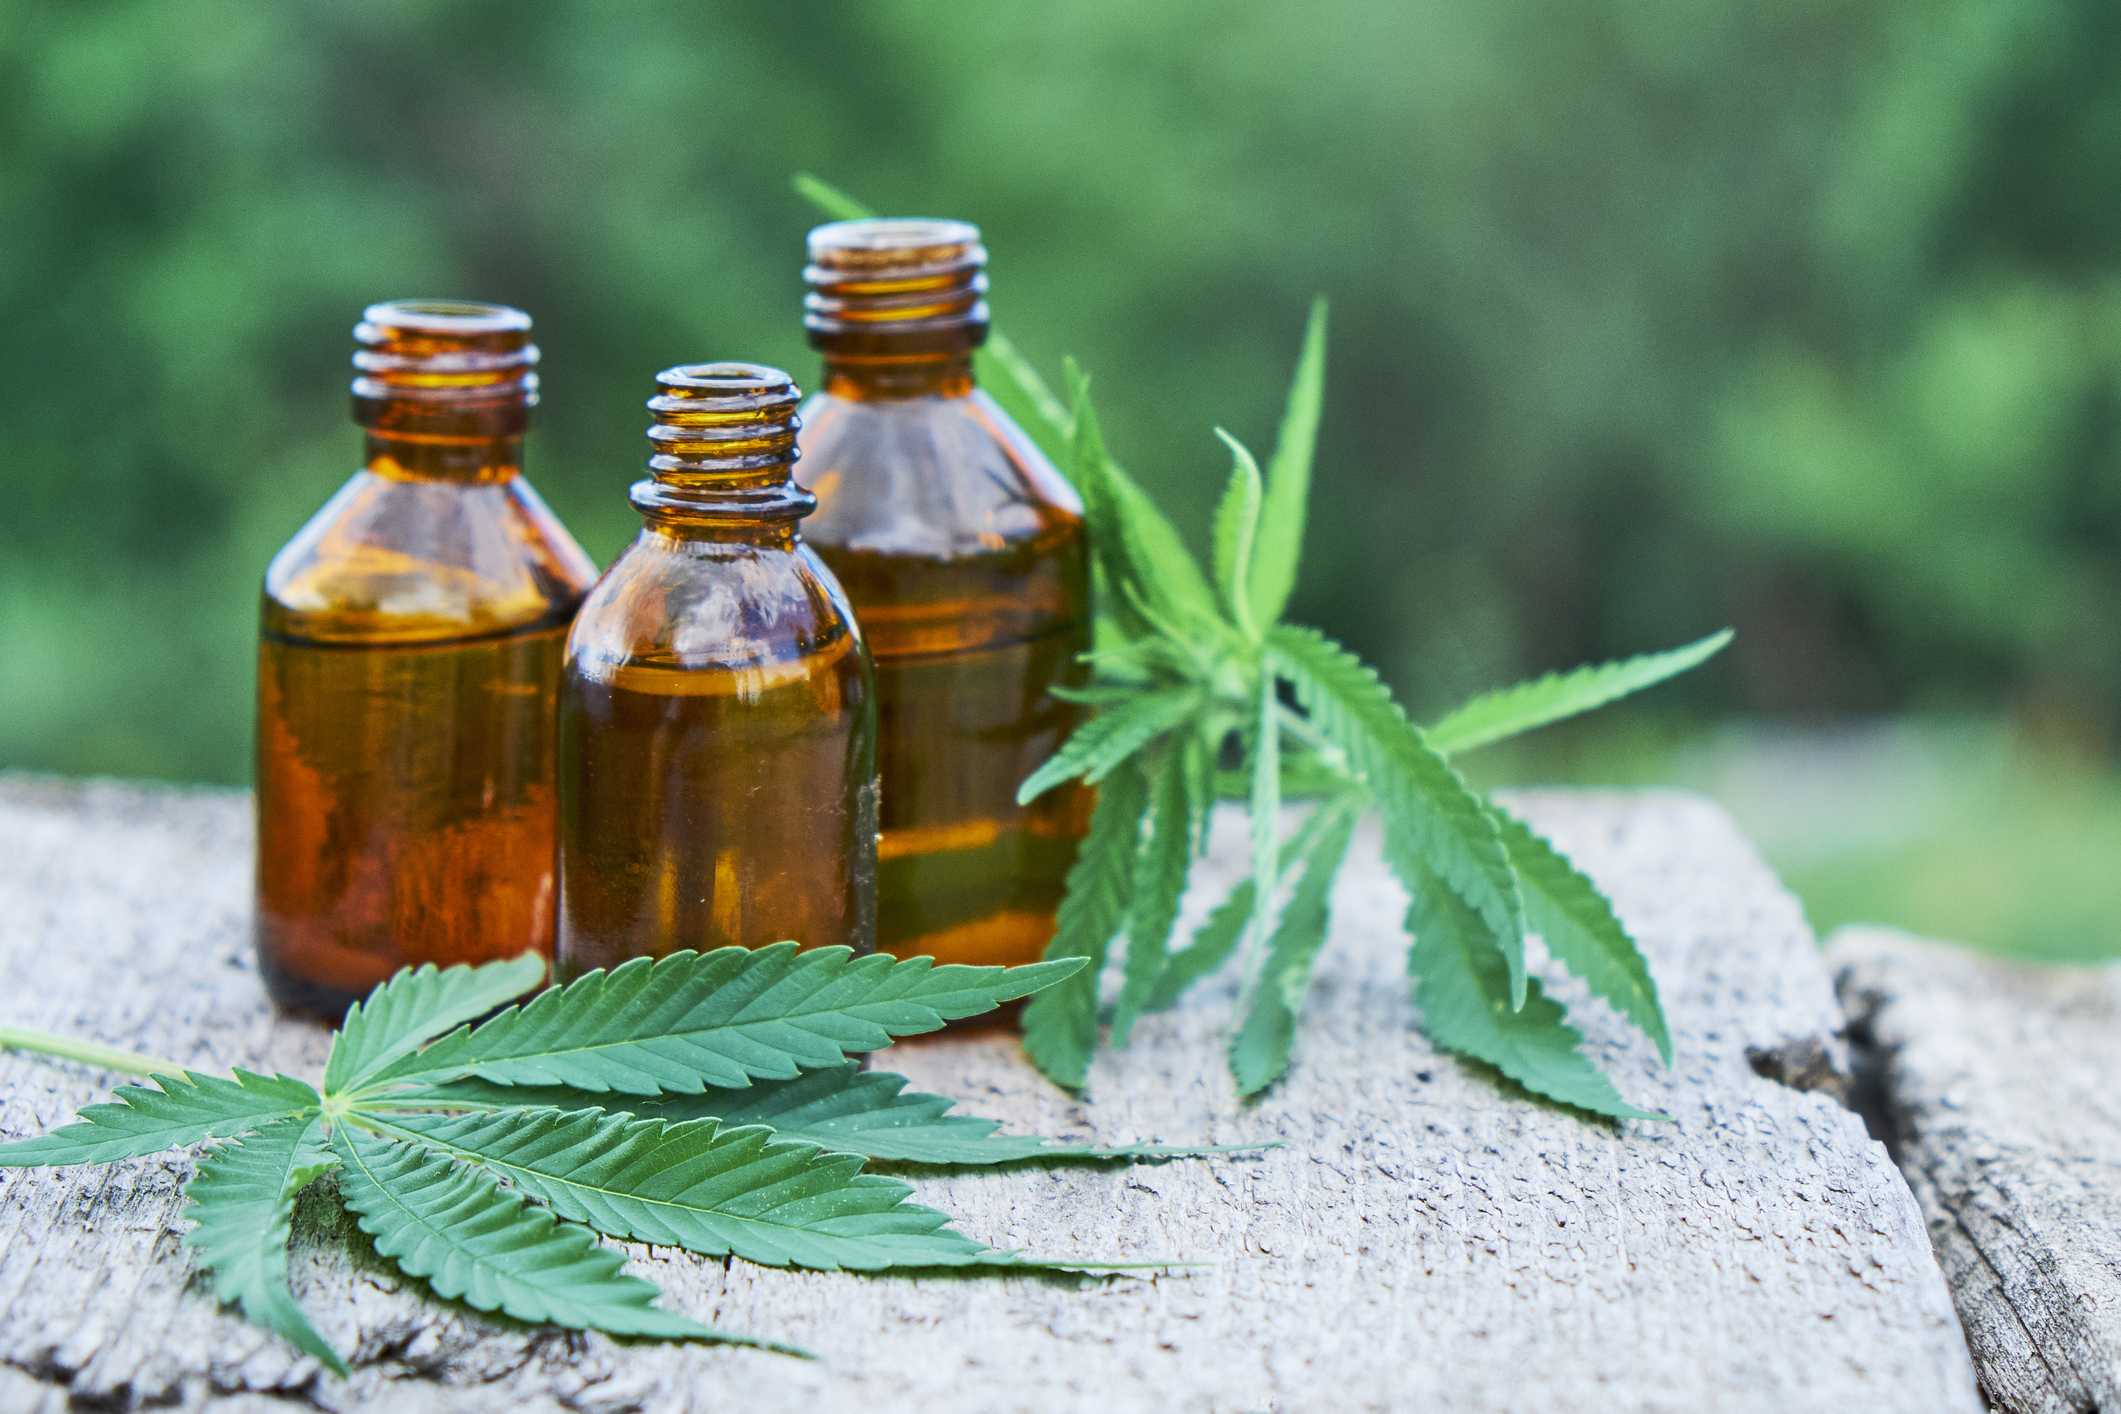 How To By Good Cbd Oil? - Cbd|Oil|Cannabidiol|Products|View|Abstract|Effects|Hemp|Cannabis|Product|Thc|Pain|People|Health|Body|Plant|Cannabinoids|Medications|Oils|Drug|Benefits|System|Study|Marijuana|Anxiety|Side|Research|Effect|Liver|Quality|Treatment|Studies|Epilepsy|Symptoms|Gummies|Compounds|Dose|Time|Inflammation|Bottle|Cbd Oil|View Abstract|Side Effects|Cbd Products|Endocannabinoid System|Multiple Sclerosis|Cbd Oils|Cbd Gummies|Cannabis Plant|Hemp Oil|Cbd Product|Hemp Plant|United States|Cytochrome P450|Many People|Chronic Pain|Nuleaf Naturals|Royal Cbd|Full-Spectrum Cbd Oil|Drug Administration|Cbd Oil Products|Medical Marijuana|Drug Test|Heavy Metals|Clinical Trial|Clinical Trials|Cbd Oil Side|Rating Highlights|Wide Variety|Animal Studies